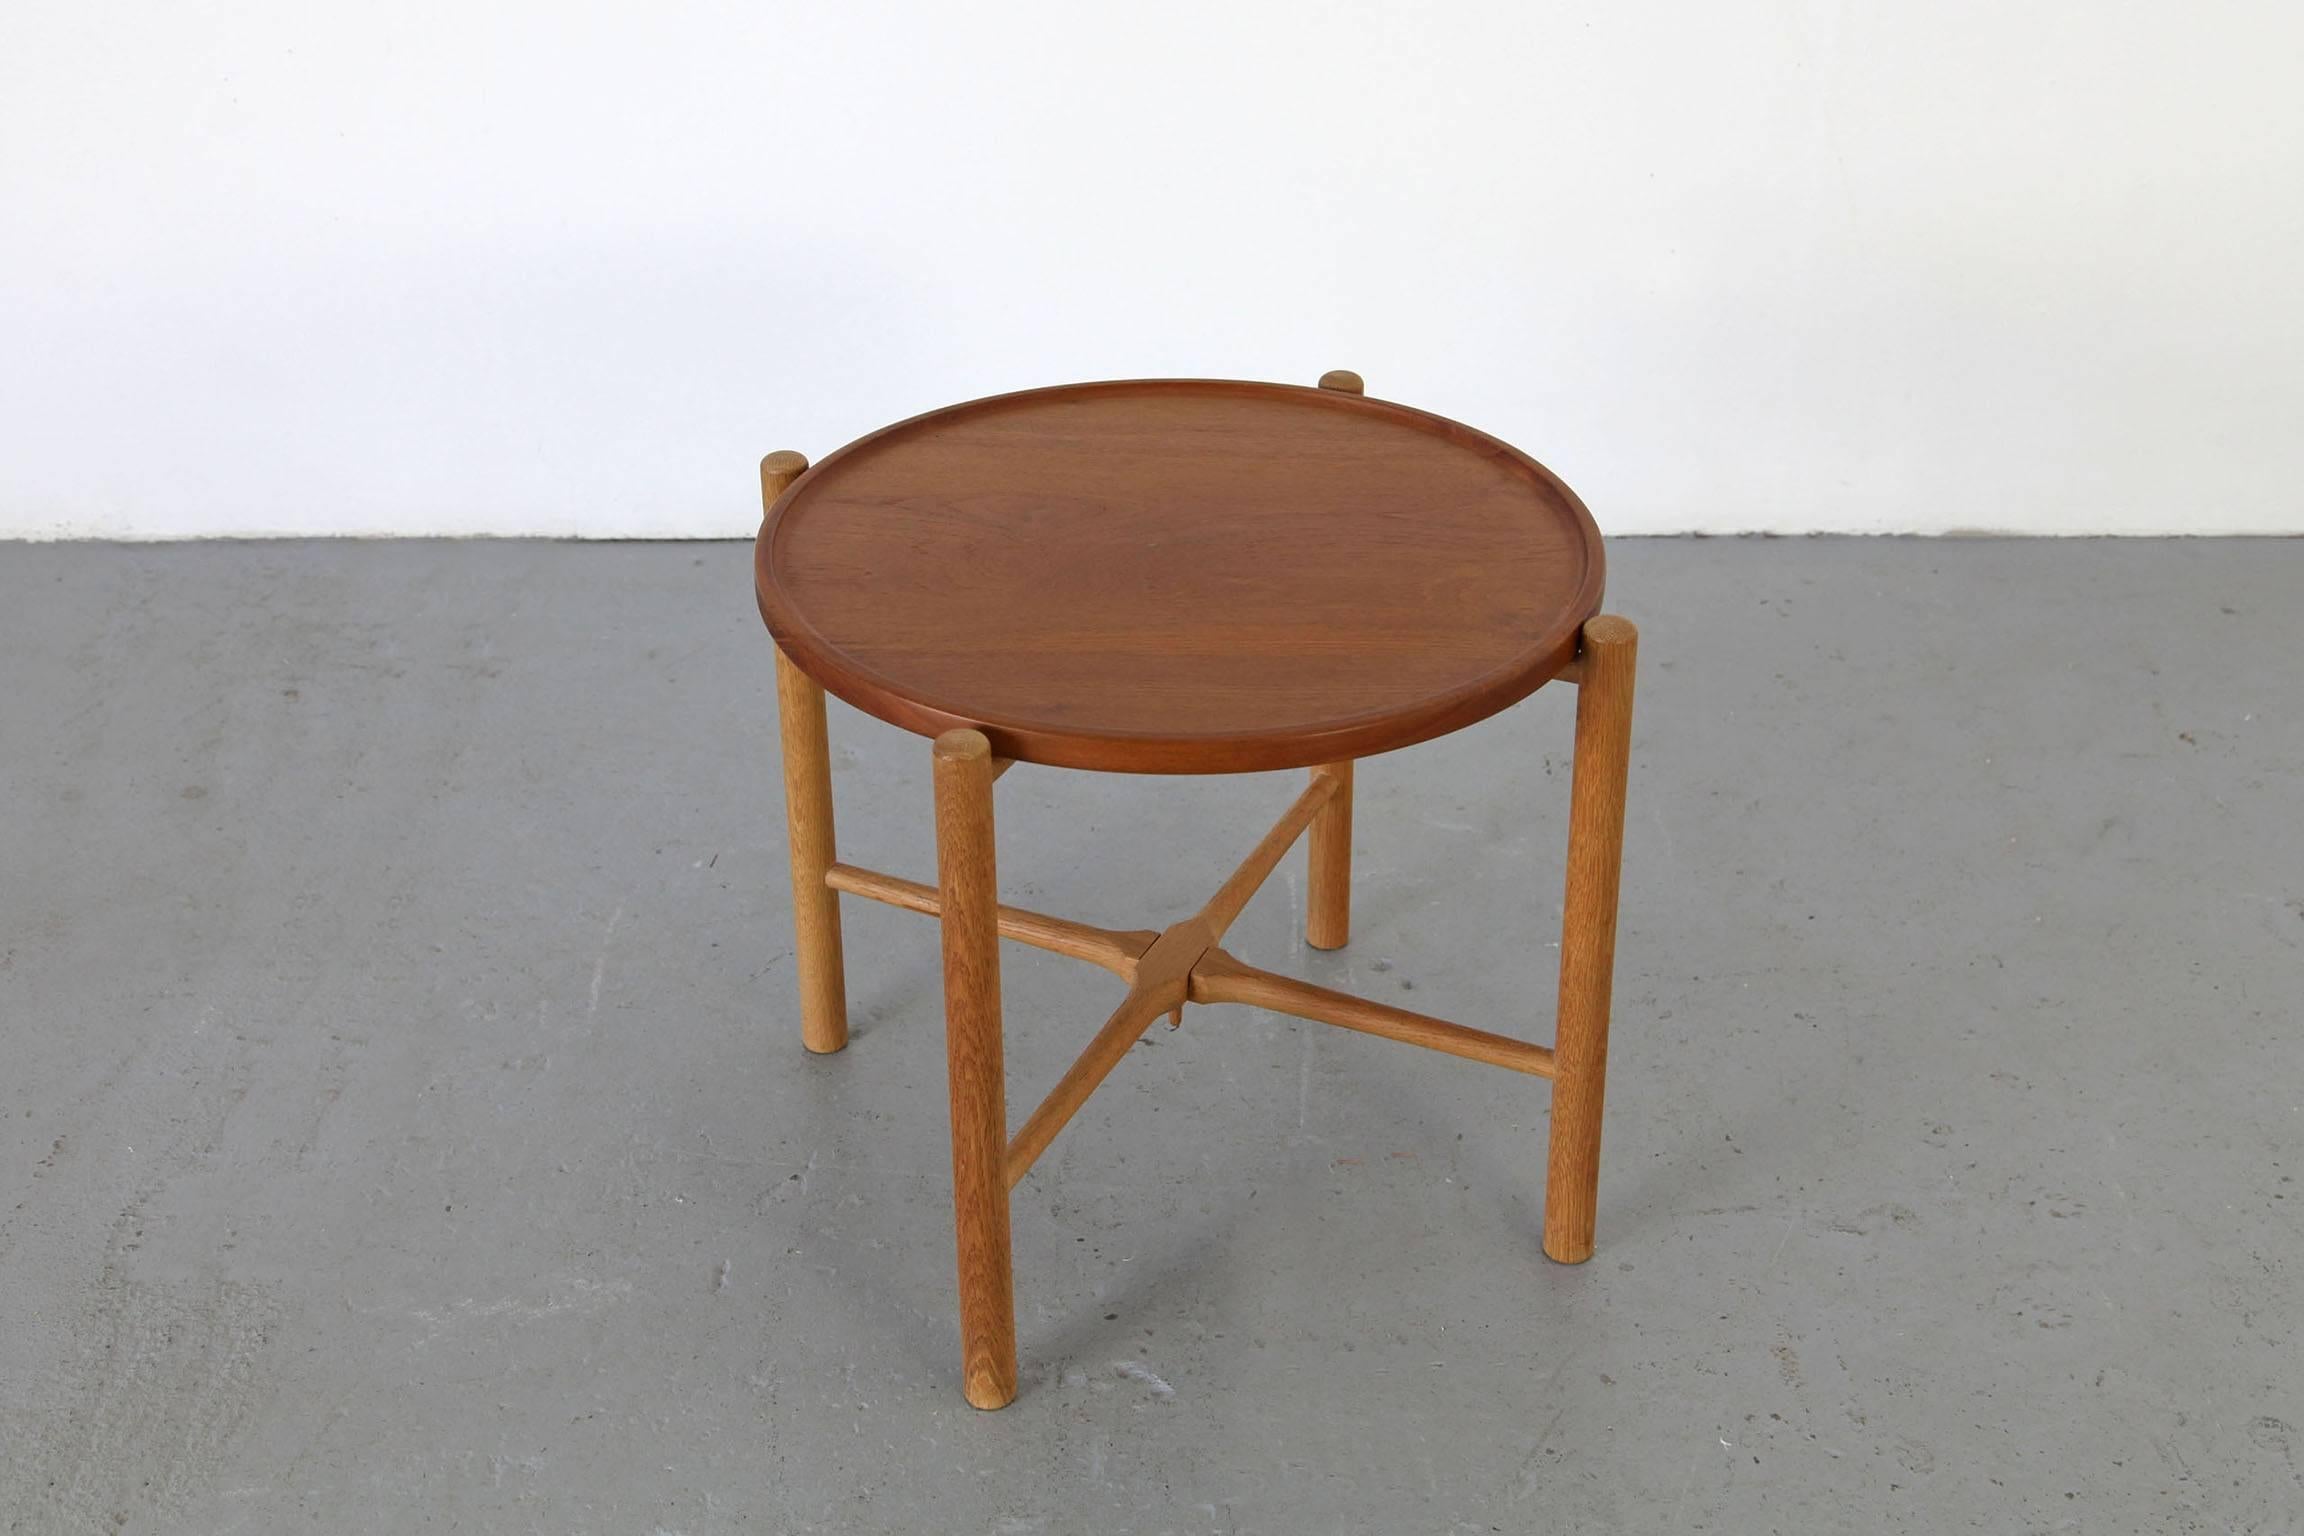 Filigree folding table mod. AT-35, designed by Hans J. Wegner for Andreas Tuck. Oak folding frame with reversible teak top. Beautiful, elegant shape. Labelled on frame. The table is in excellent condition.